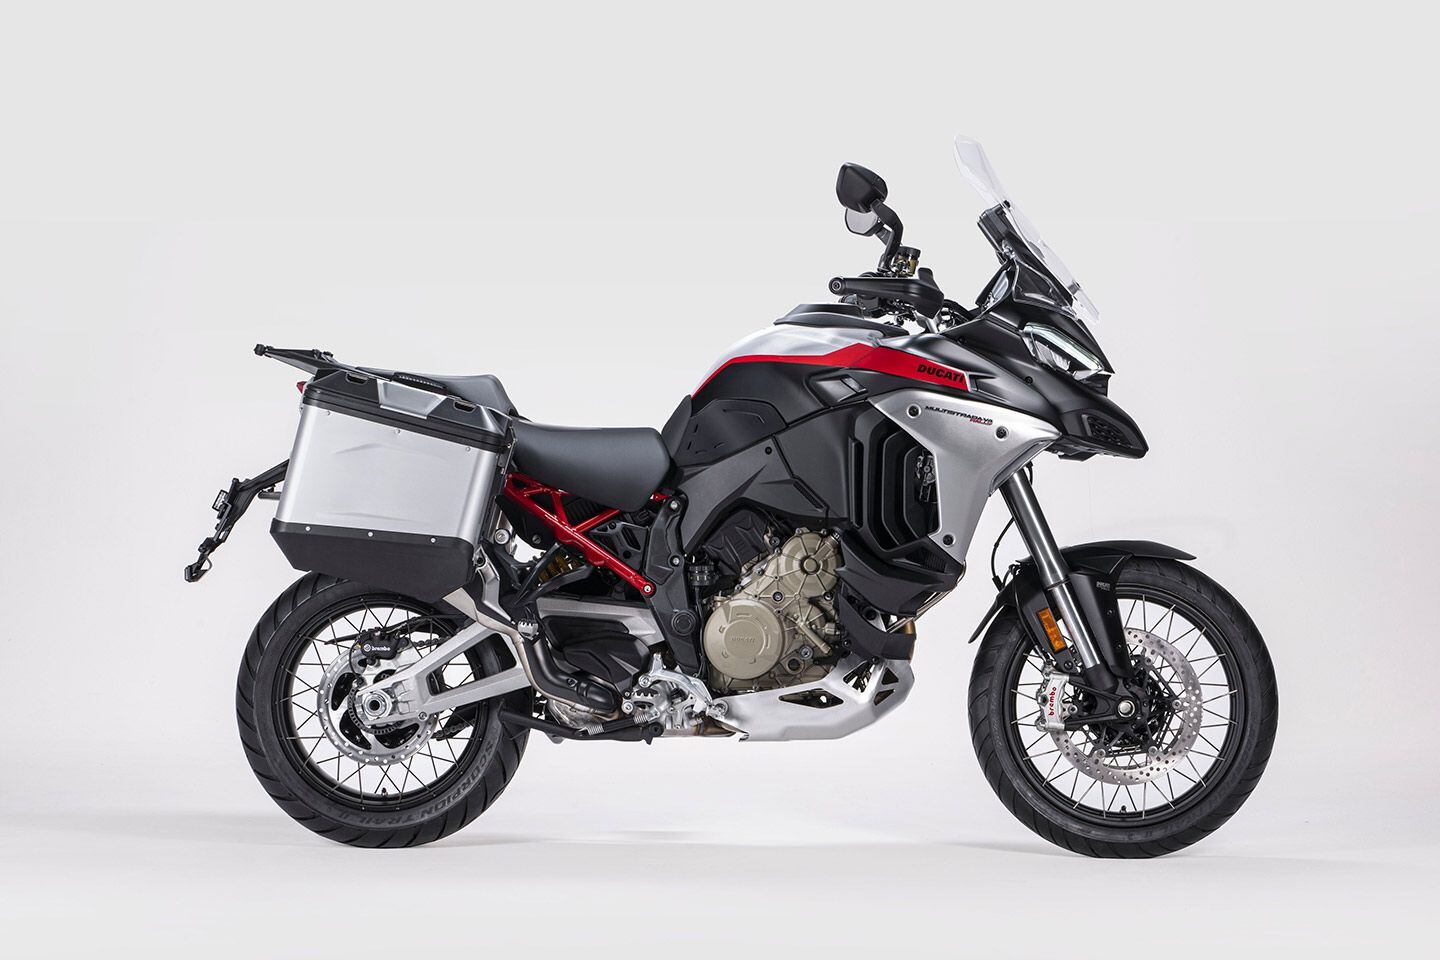 On the hardware side, the V4 Rally comes with Ducati’s Skyhook suspension with Marzocchi components. Top-of-the-line Brembo Stylema brakes are used up front.